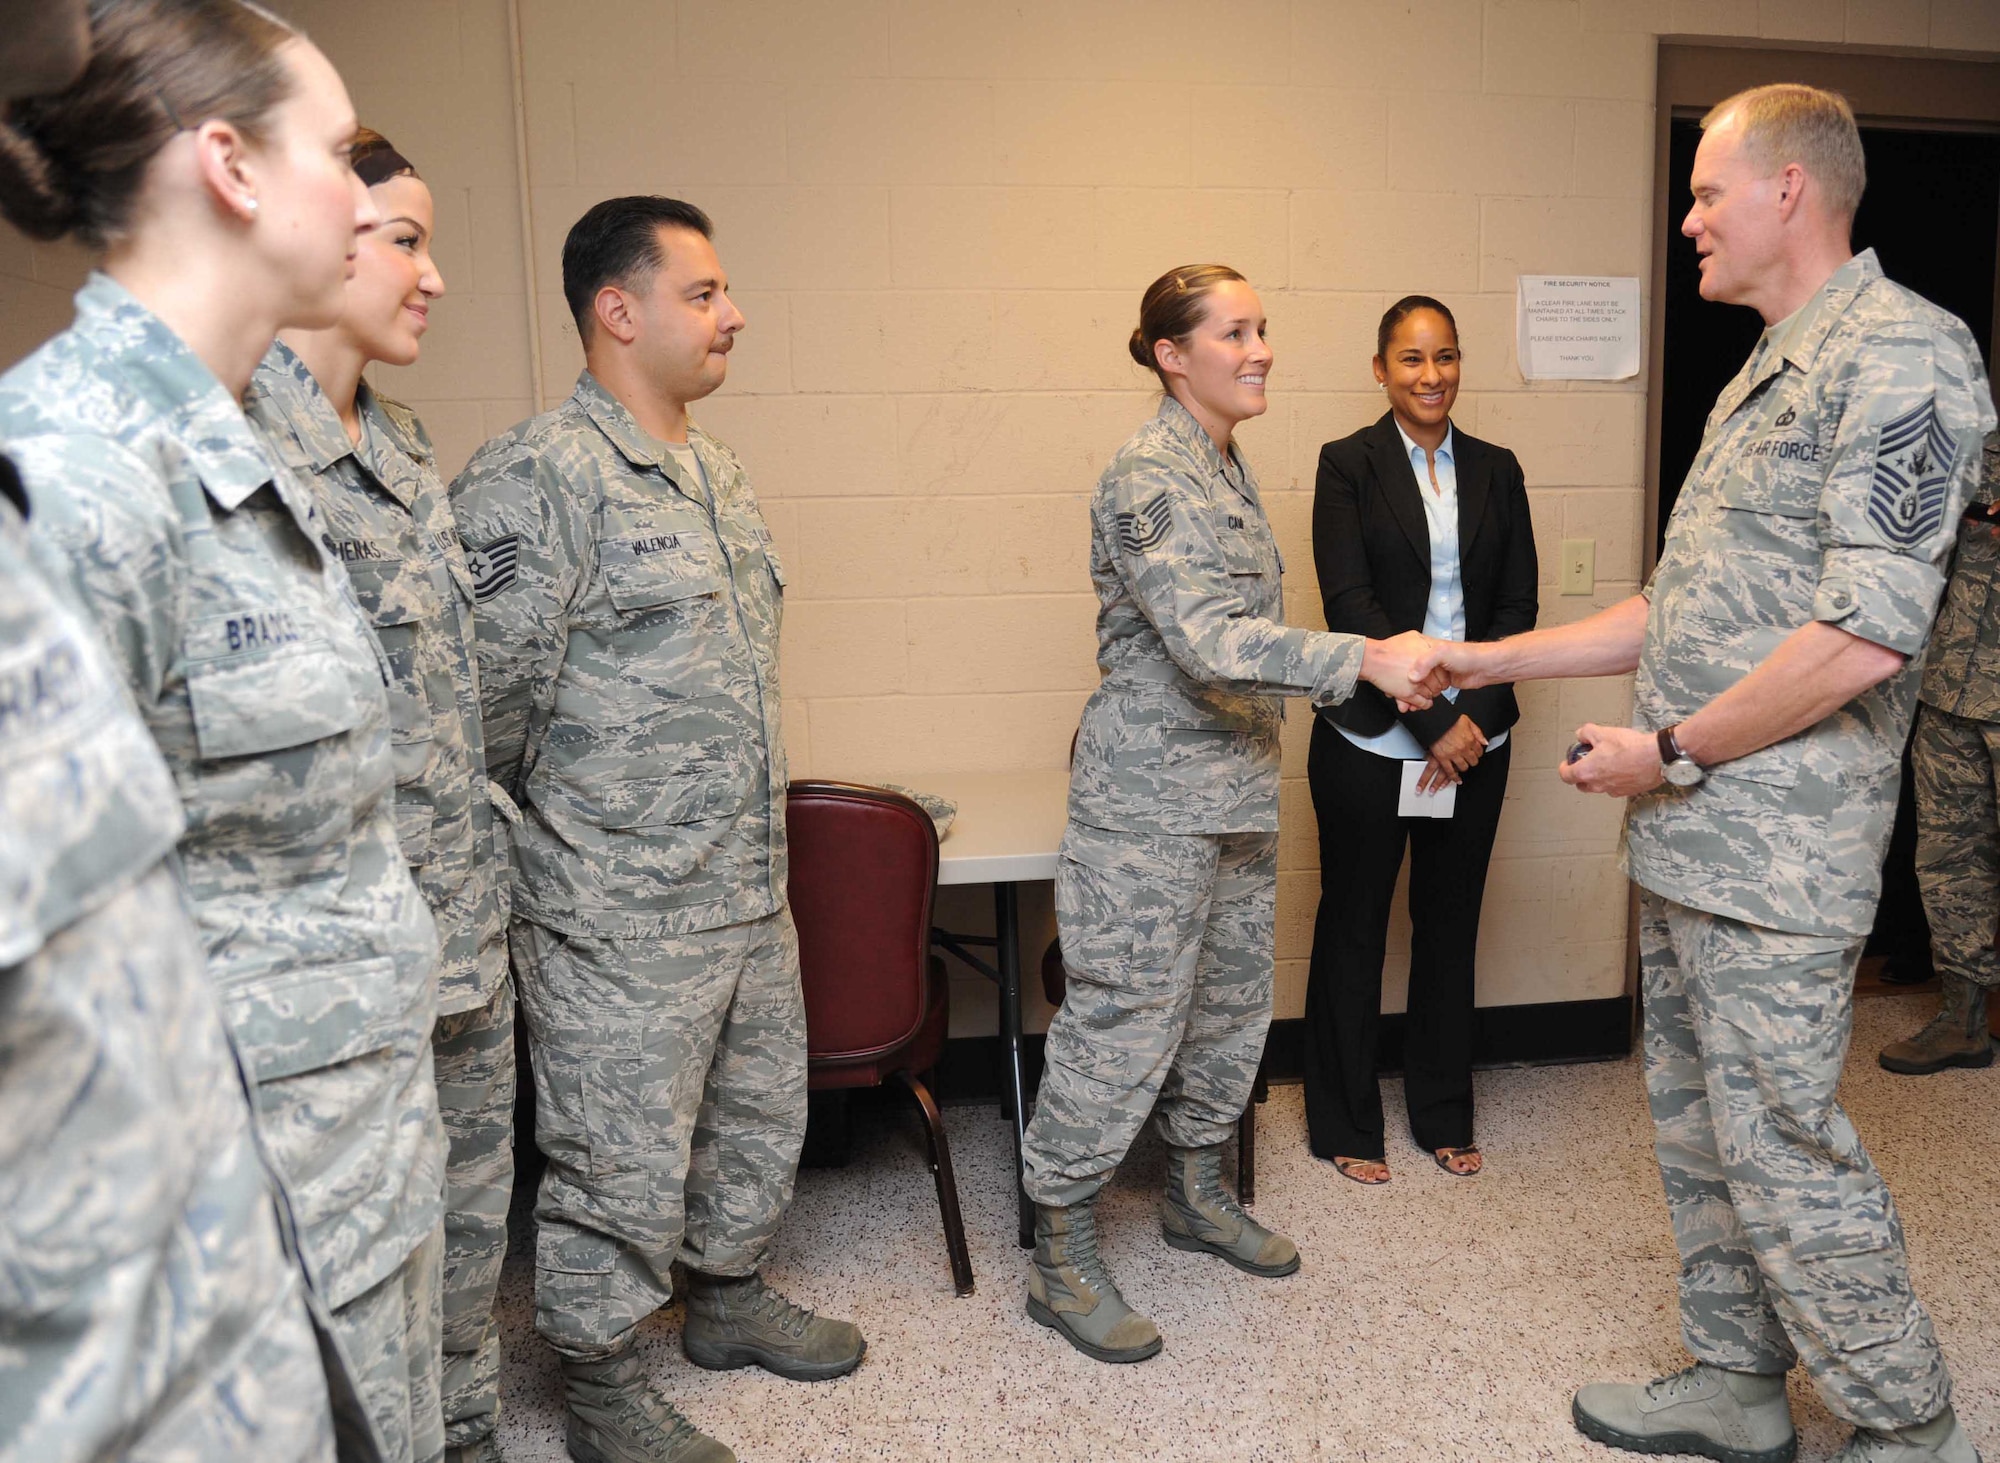 Chief Master Sgt. of the Air Force James A. Cody recognizes Tech. Sgt. Christina Camp with a coin as her supervisor, Desirae McIntyre, stands by Sept. 23, 2014, at the Welch Theater on Keesler Air Force Base, Miss. The purpose of the two-day visit was to thank Keesler AFB members and further understand the various missions here, including 2nd Air Force, 81st Training Wing and the 403rd Wing. Camp is assigned to the 334th Training Squadron. (U.S. Air Force photo/Kemberly Groue)